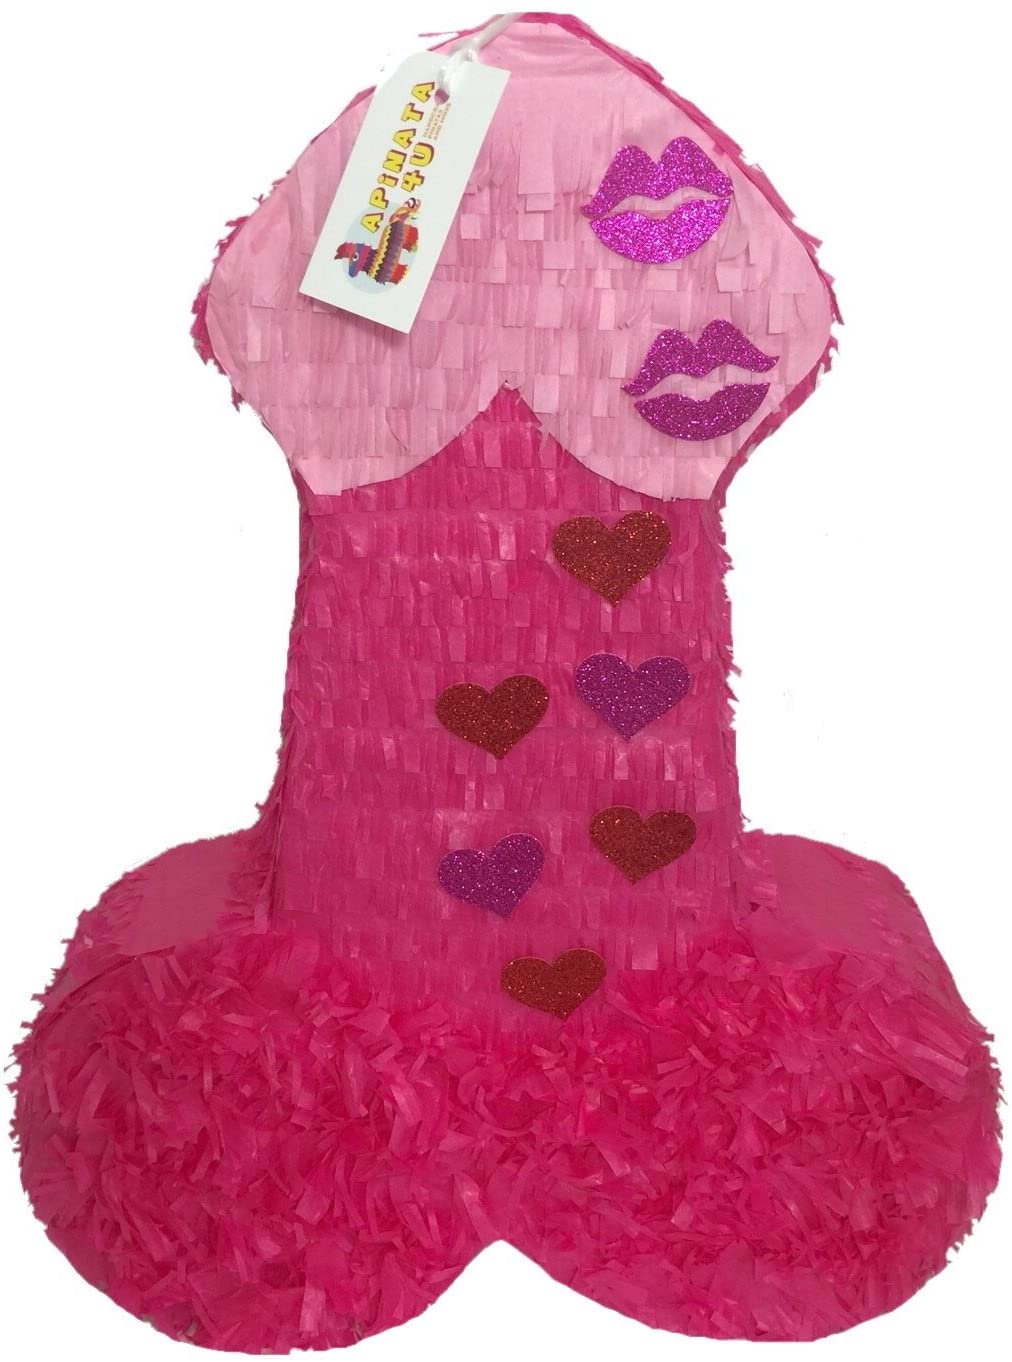 APINATA4U LLC - Penis Adult Pinata | Hot Pink with Glitter Kisses | Ideal for Bachelorette Party | Made with High Quality Cardboard | Party & Game | Size - 20